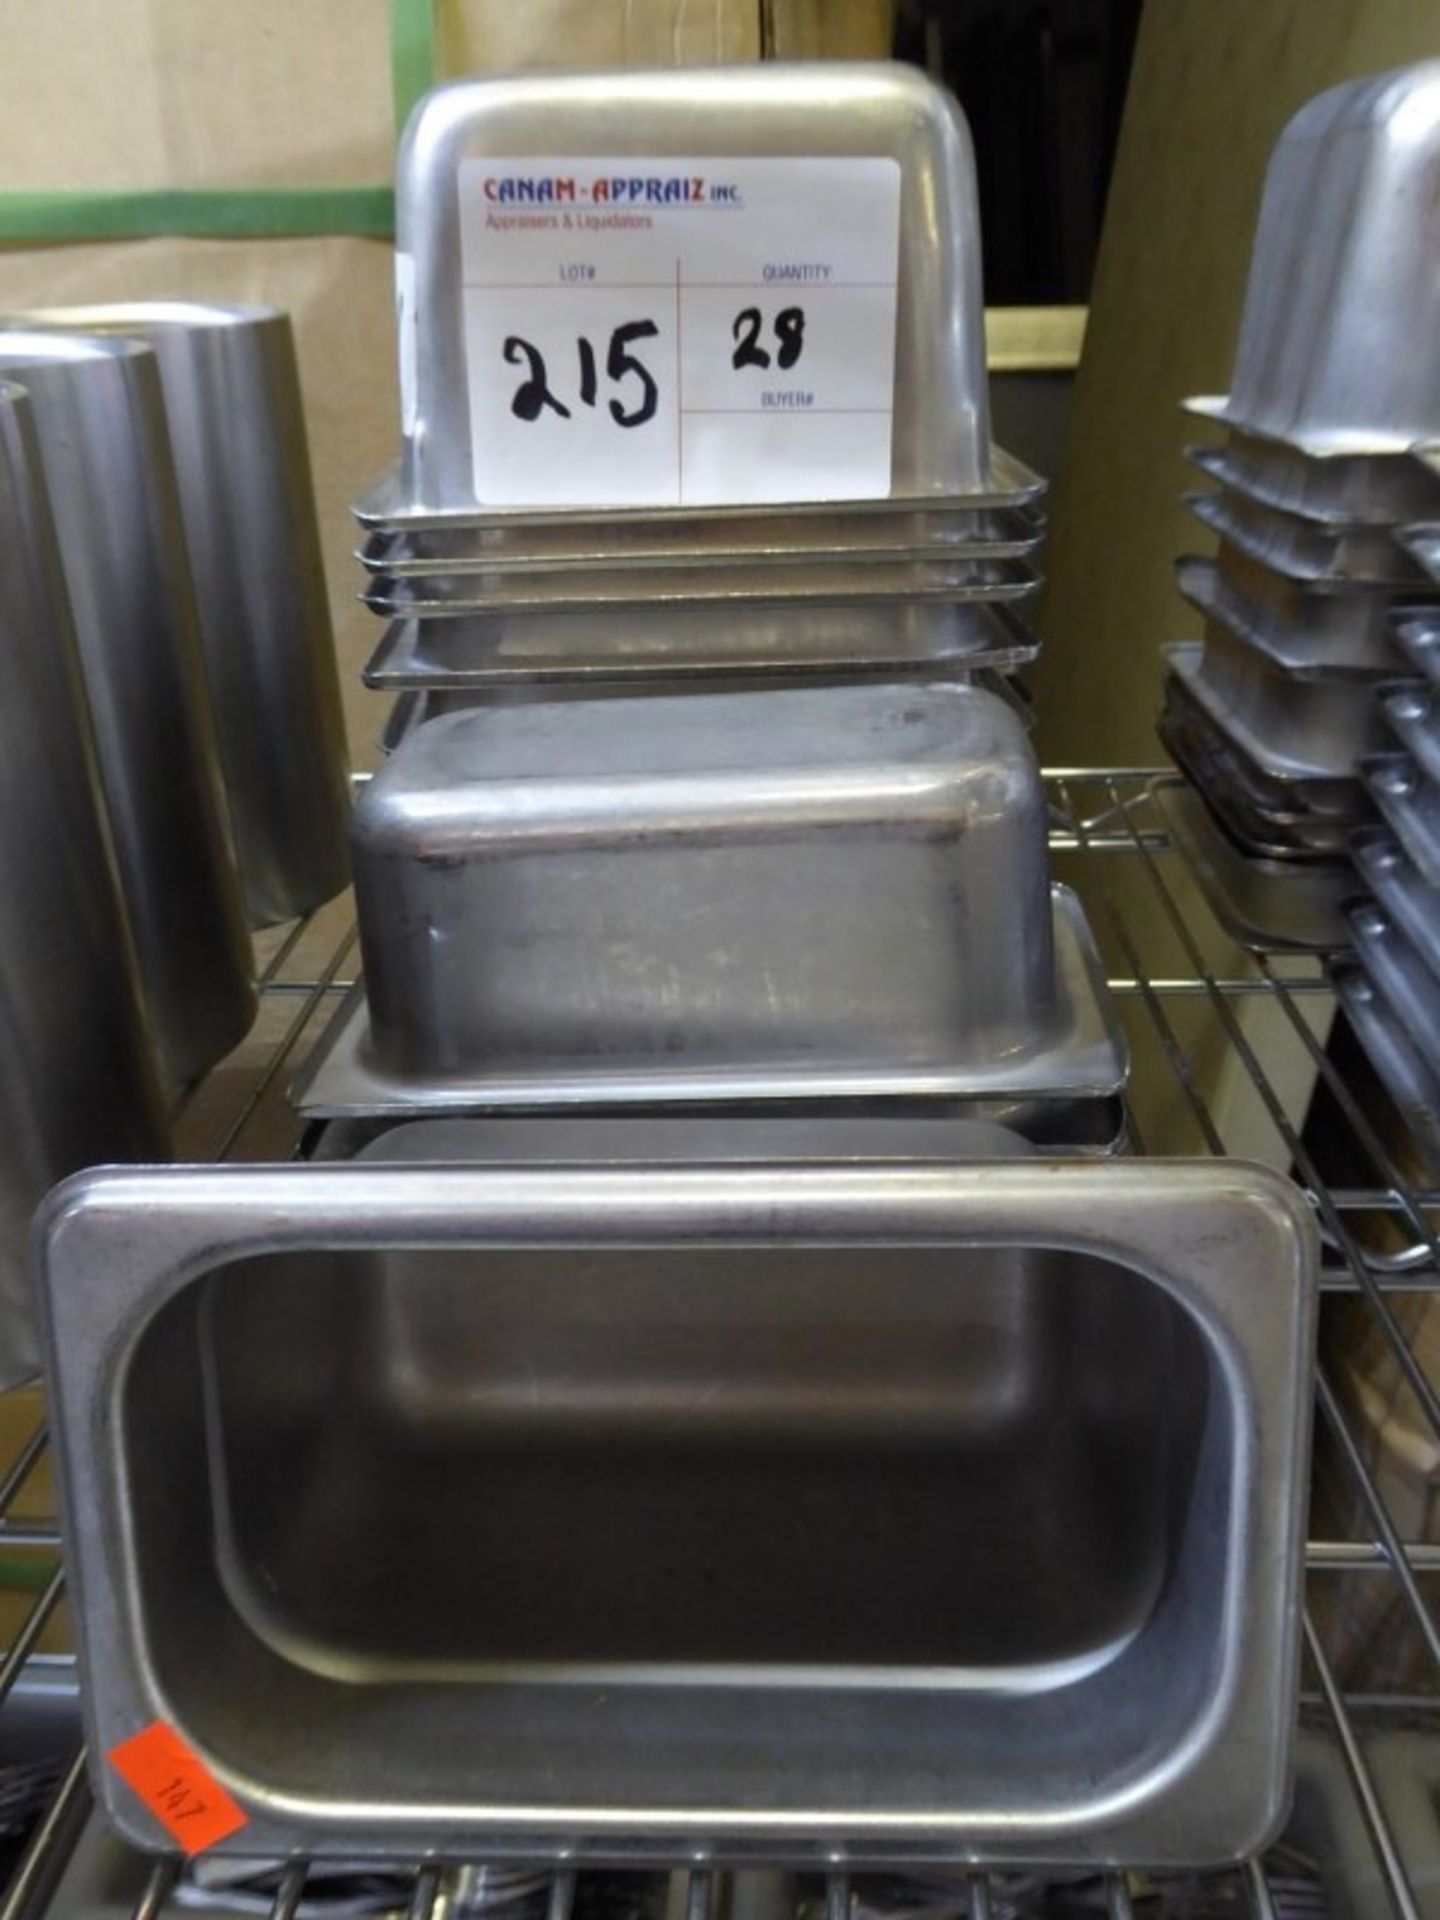 STAINLESS STEEL INSTERT PAN - MIXED LOT - X 28PCS